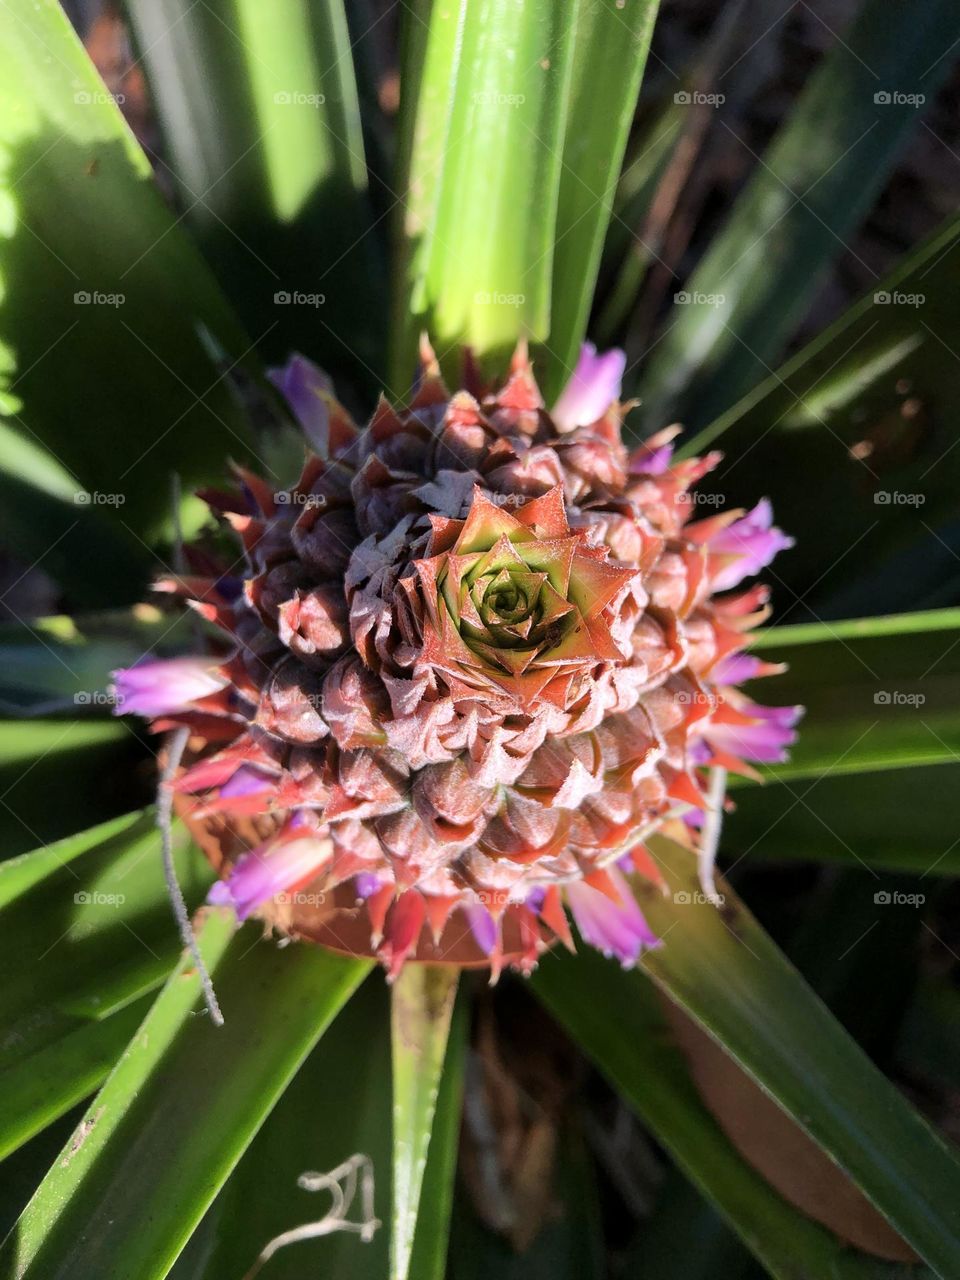 Fibonacci sequence visible on pinkish pineapple flower in bloom